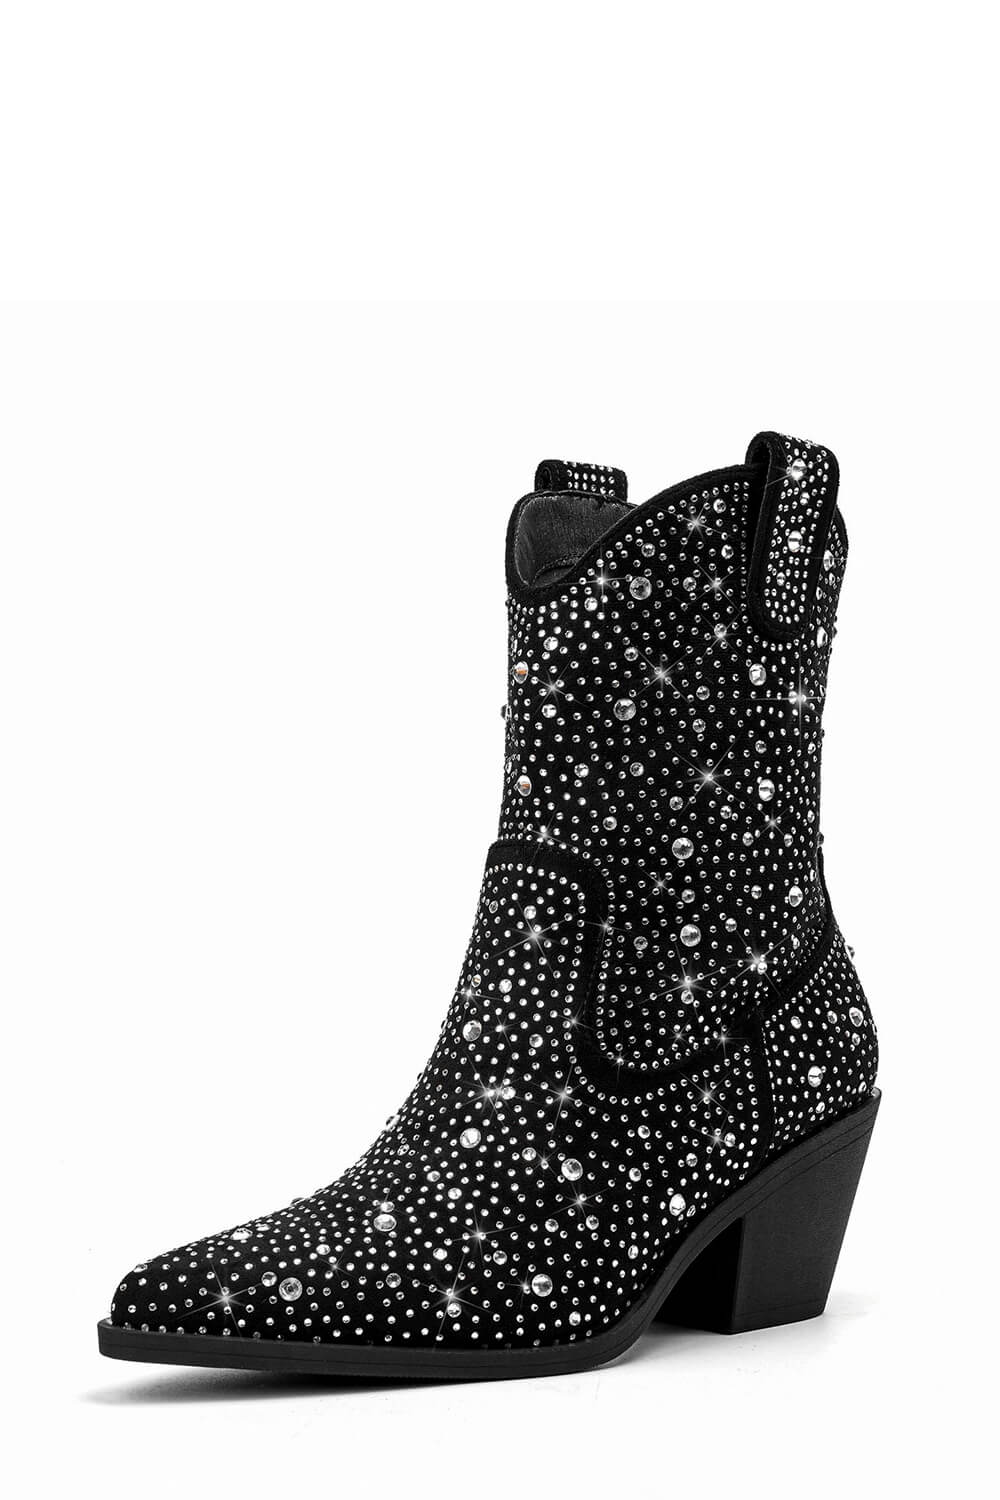 Rhinestones Embellished Faux Leather Western Cowboy Pointed Toe Block Heeled Ankle Boots